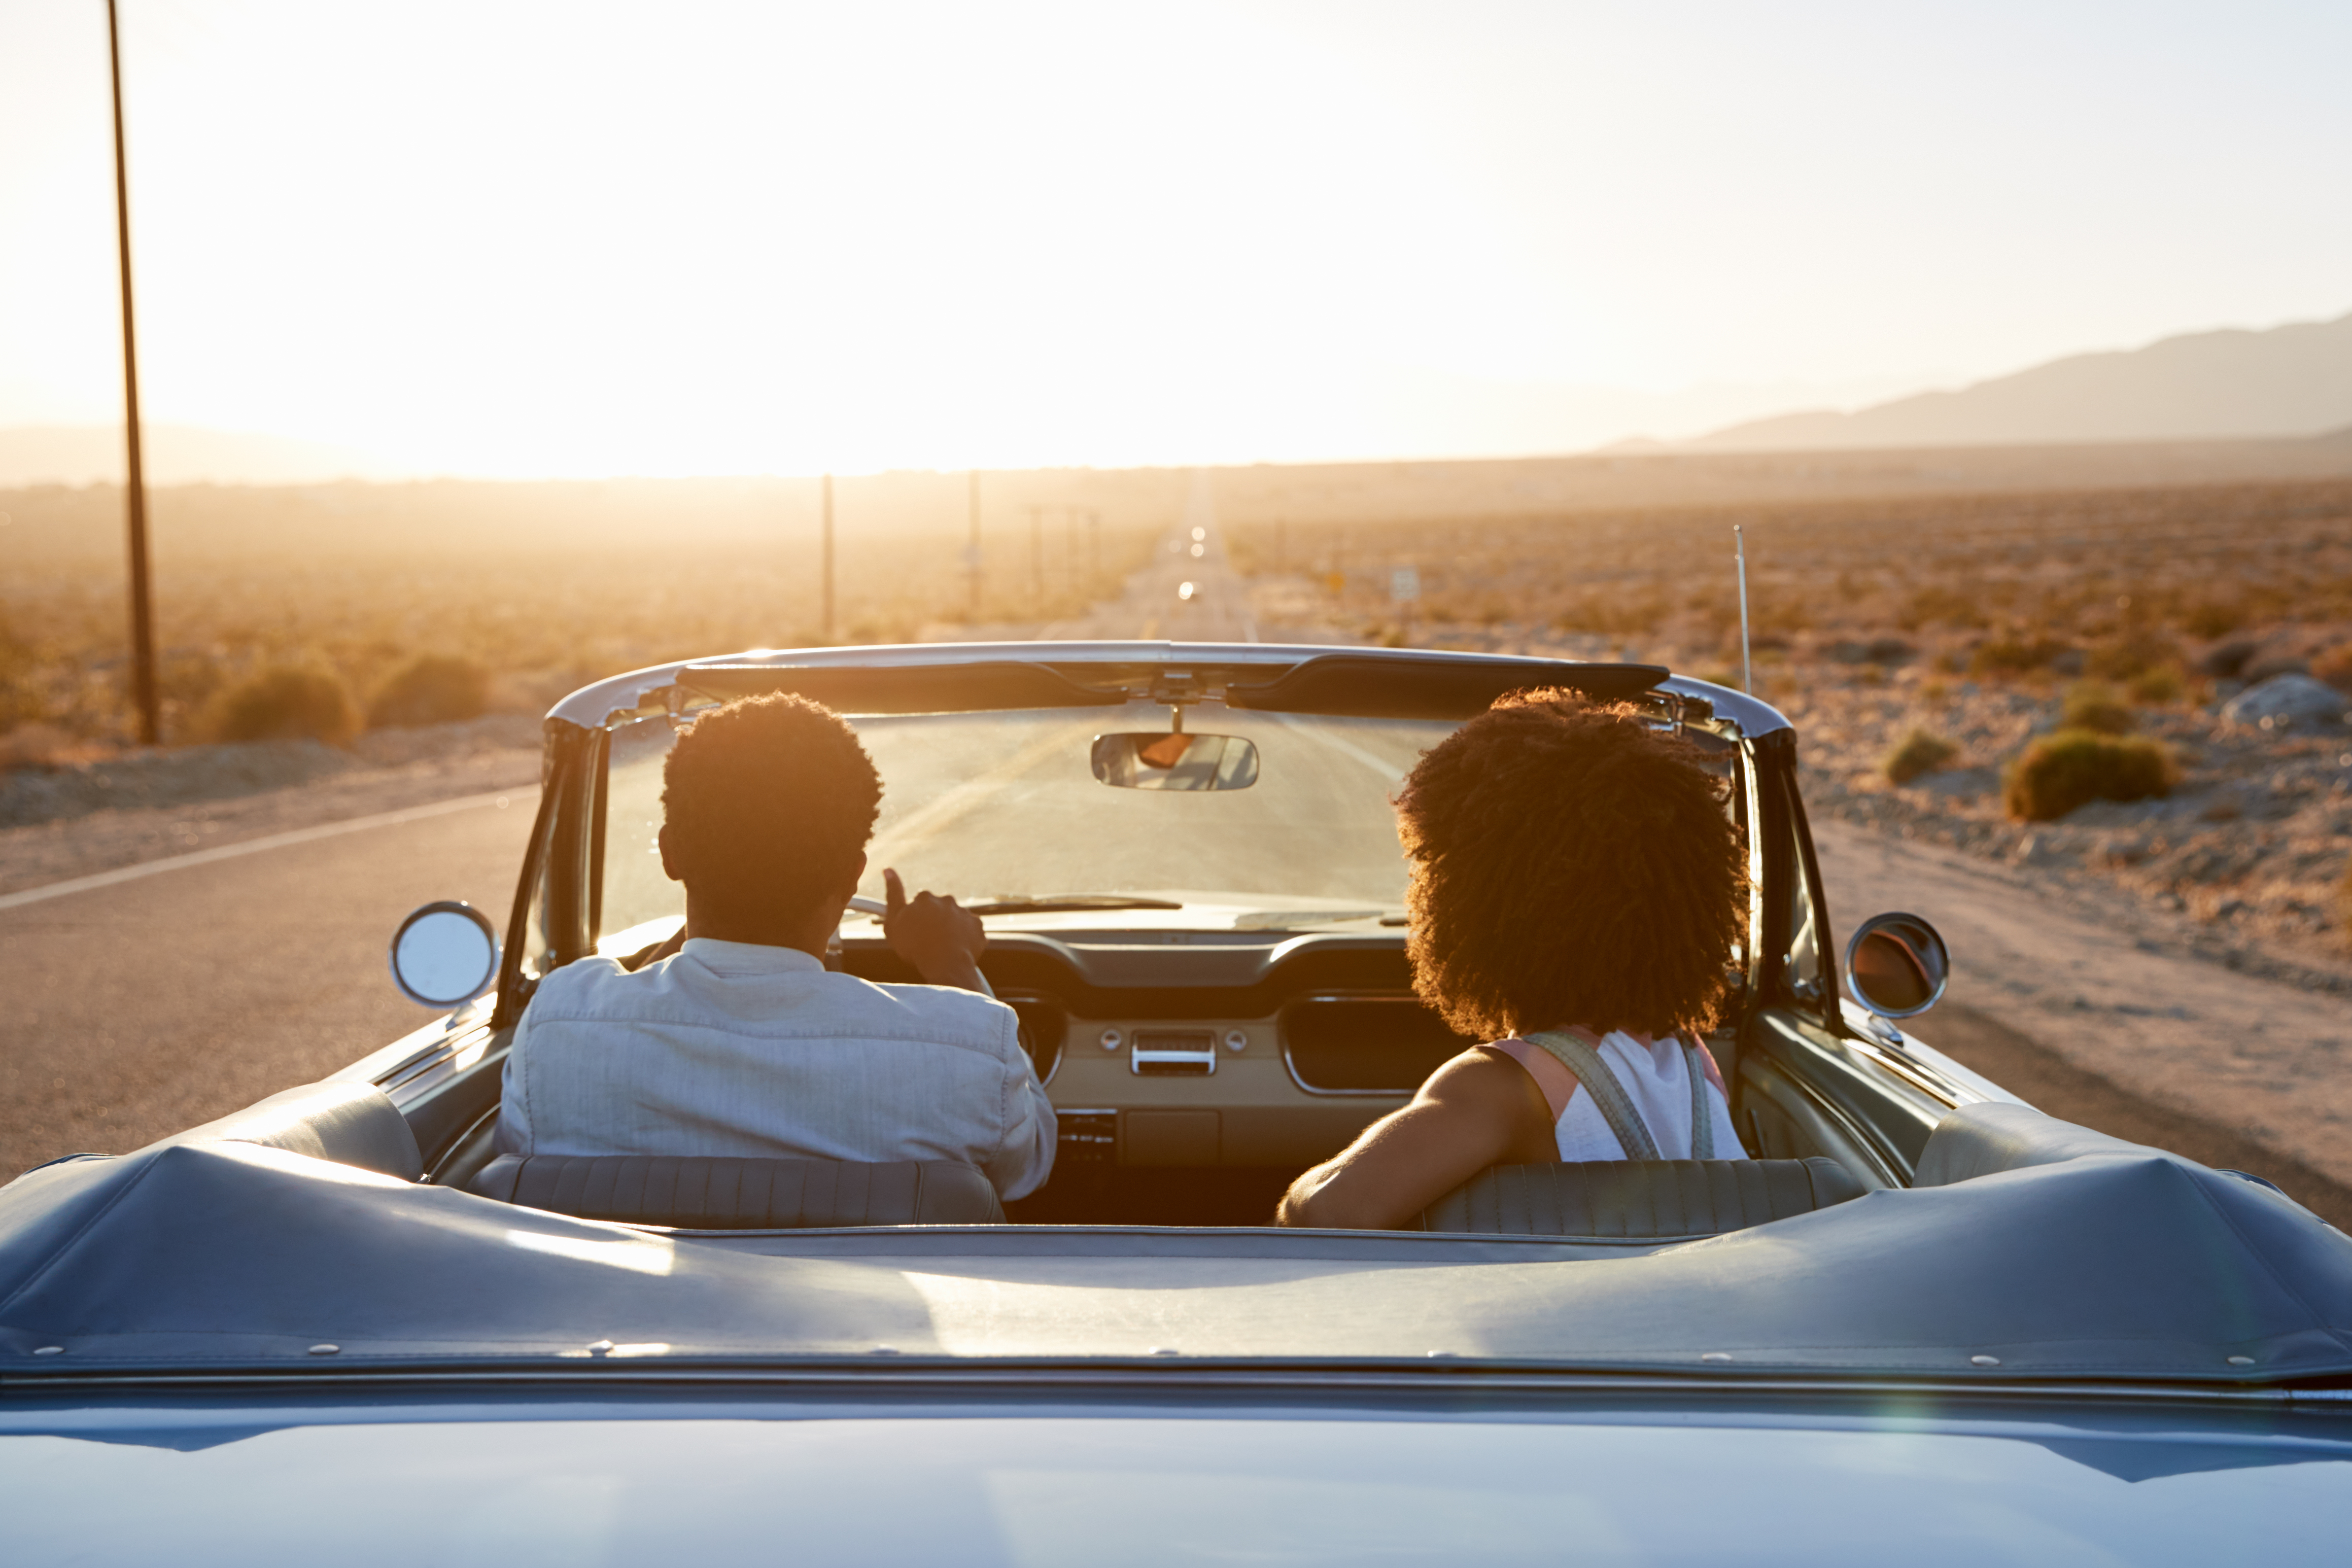 Driving your classic car for at least 10-15 miles each month can keep your engine lubricated and prevent parts from seizing.